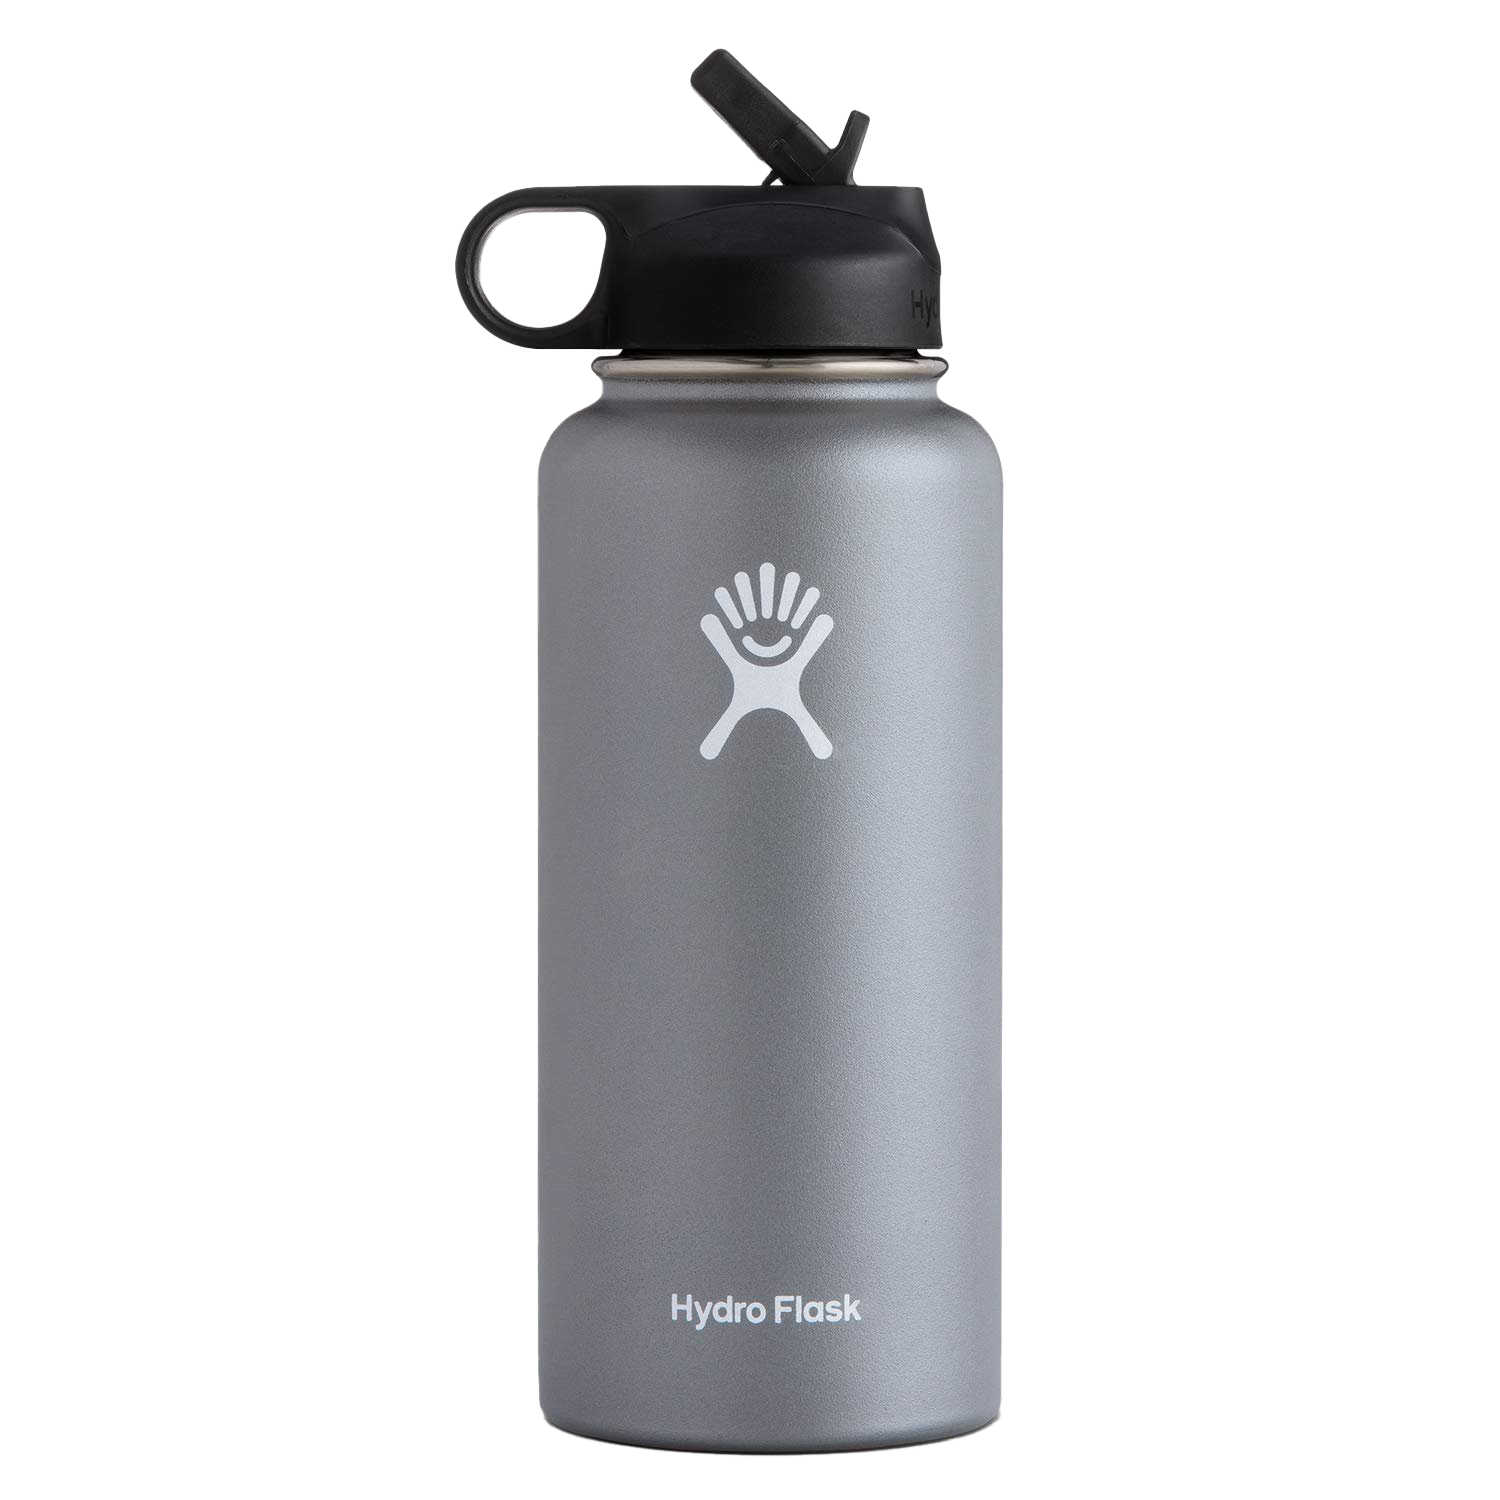 Reusable Hydro Flask Free PNG Image